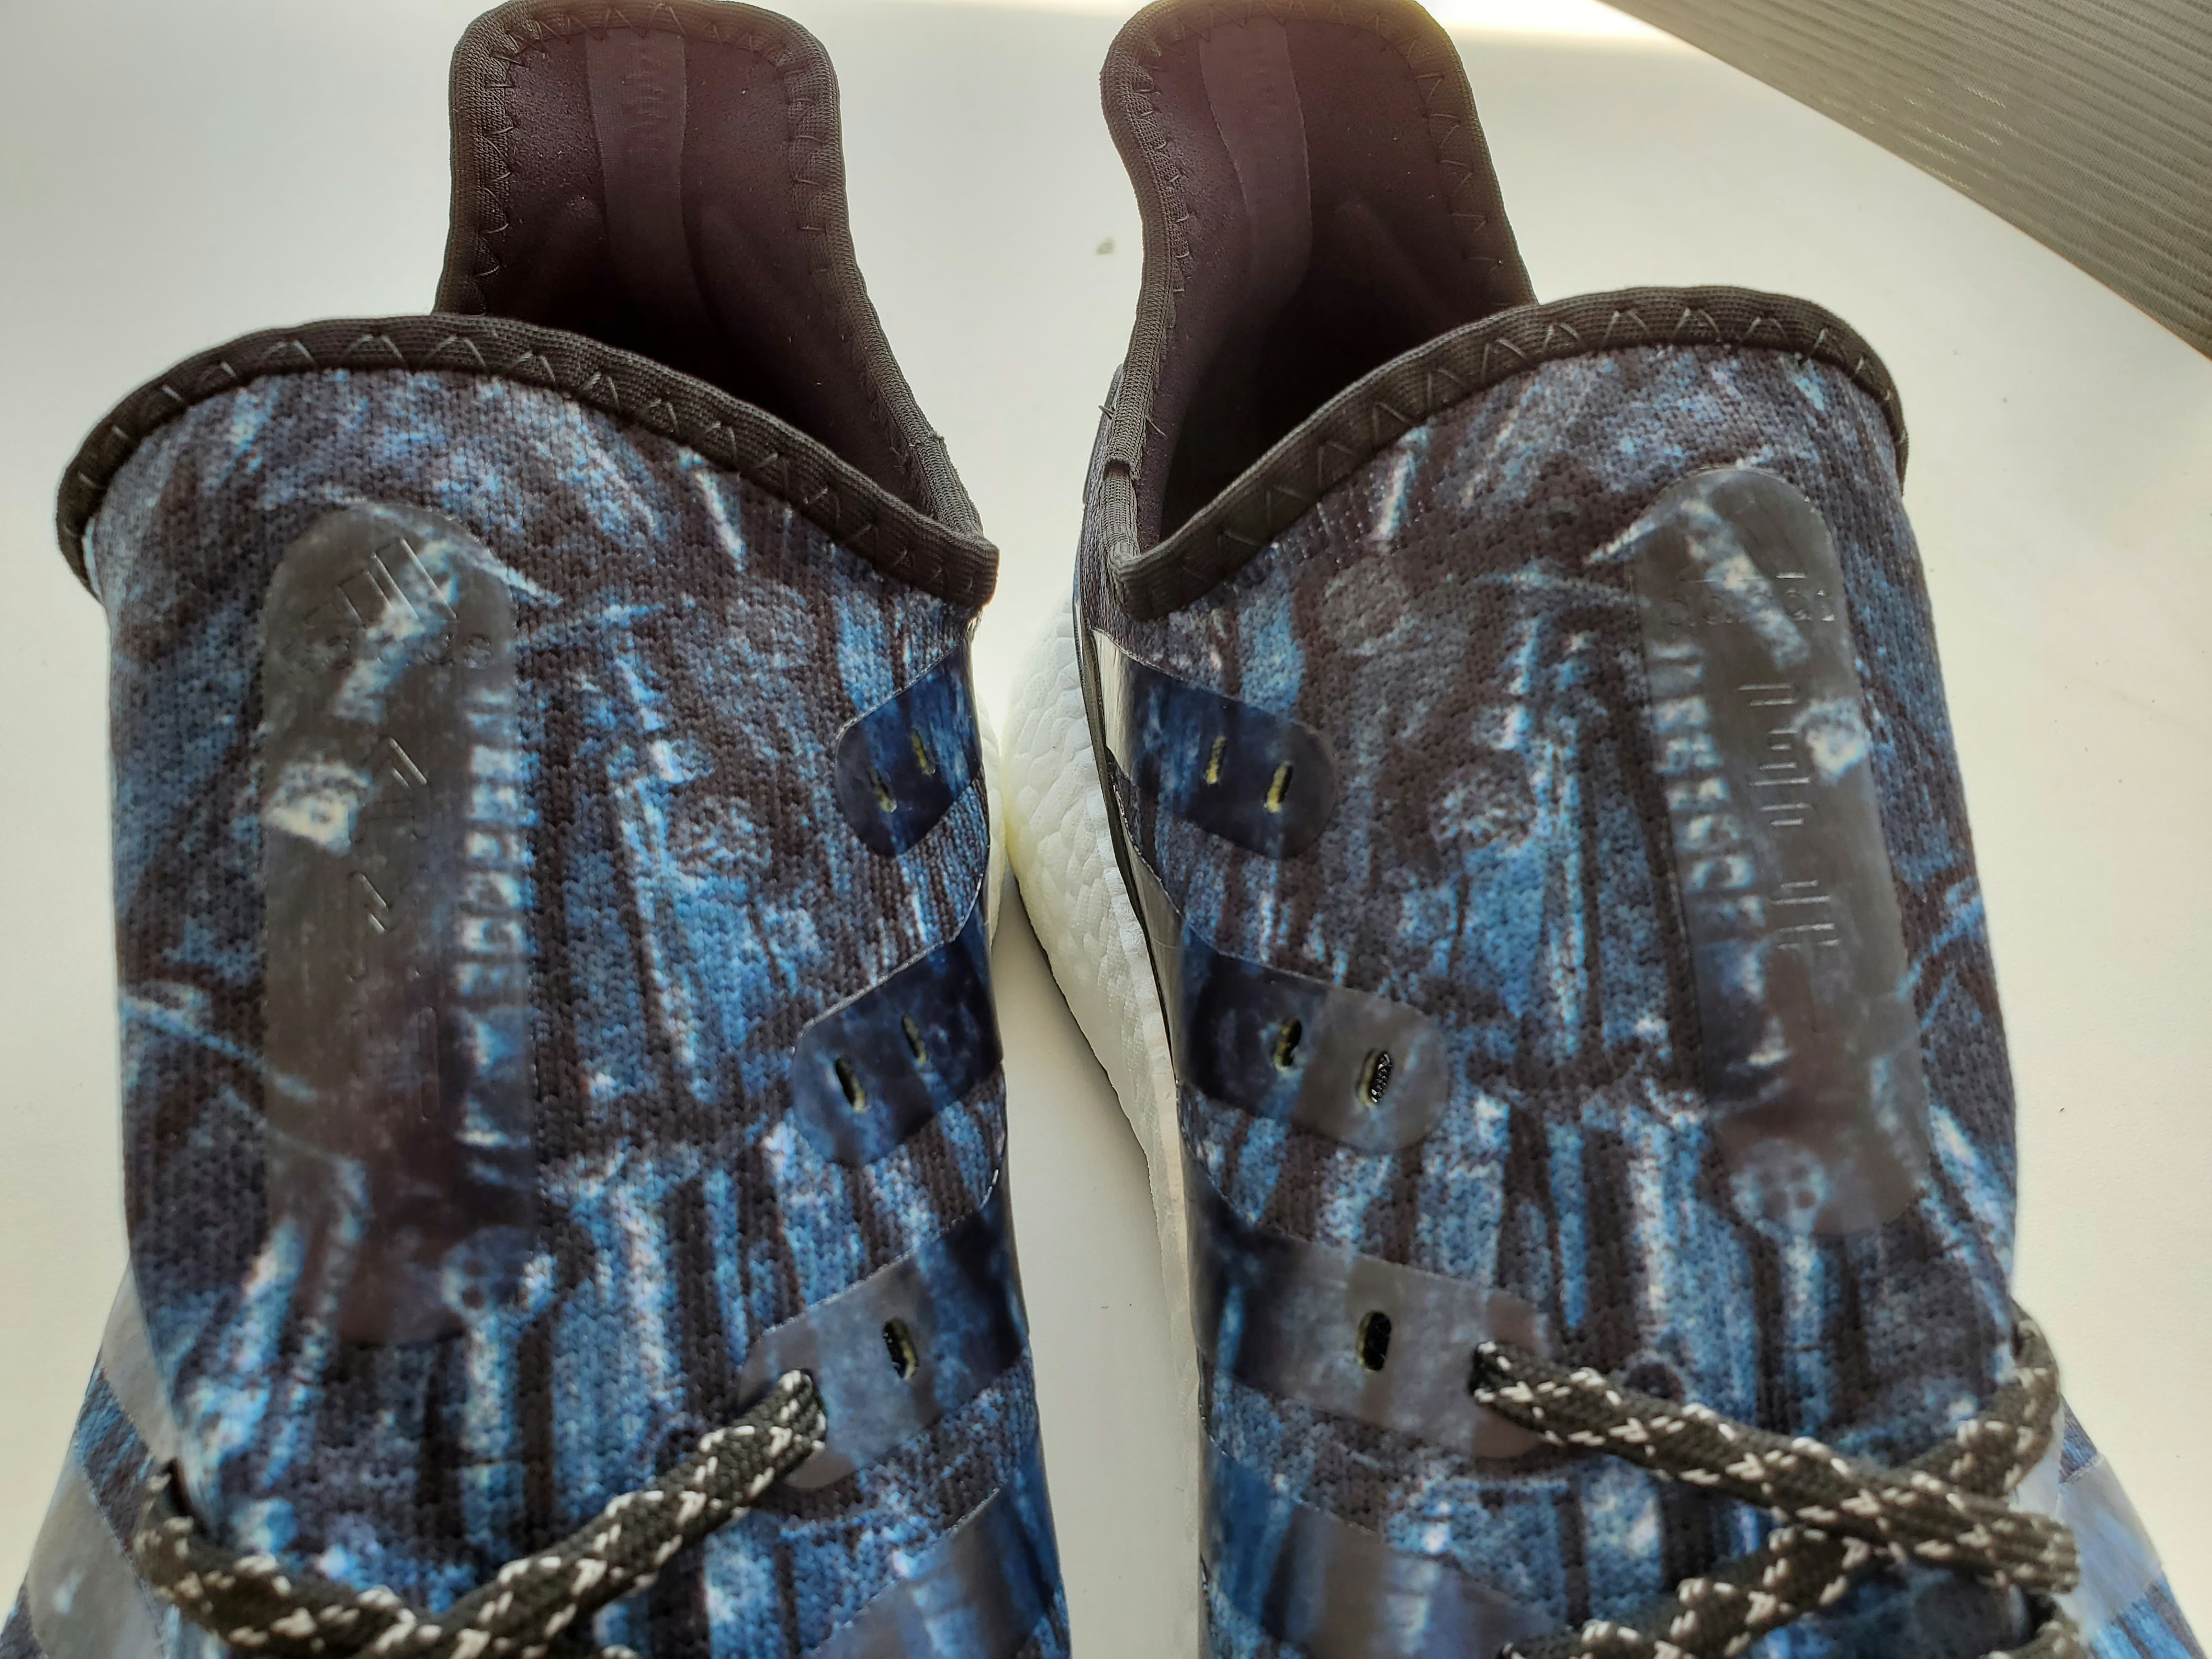 where to buy game of thrones shoes